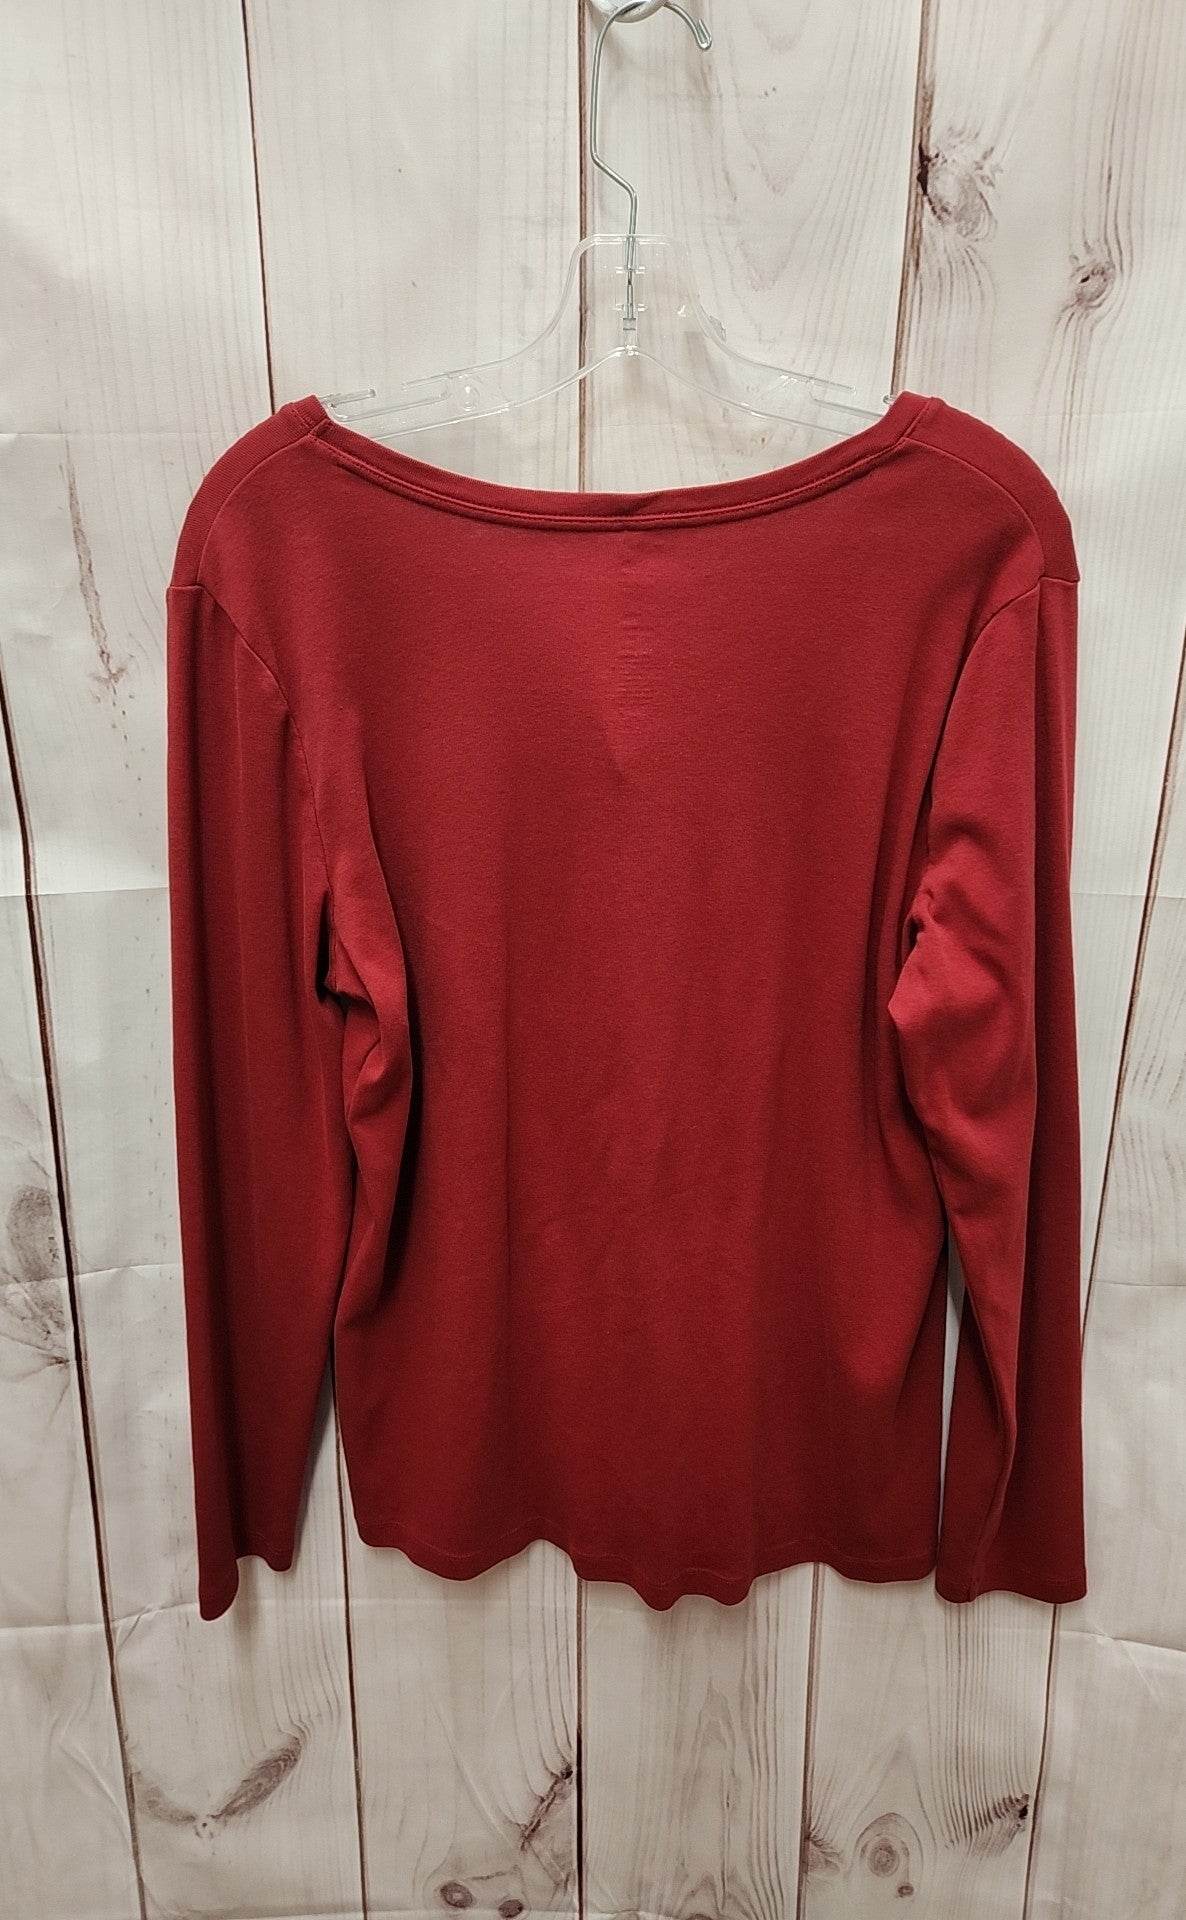 St Johns Bay Women's Size XL Red Long Sleeve Top